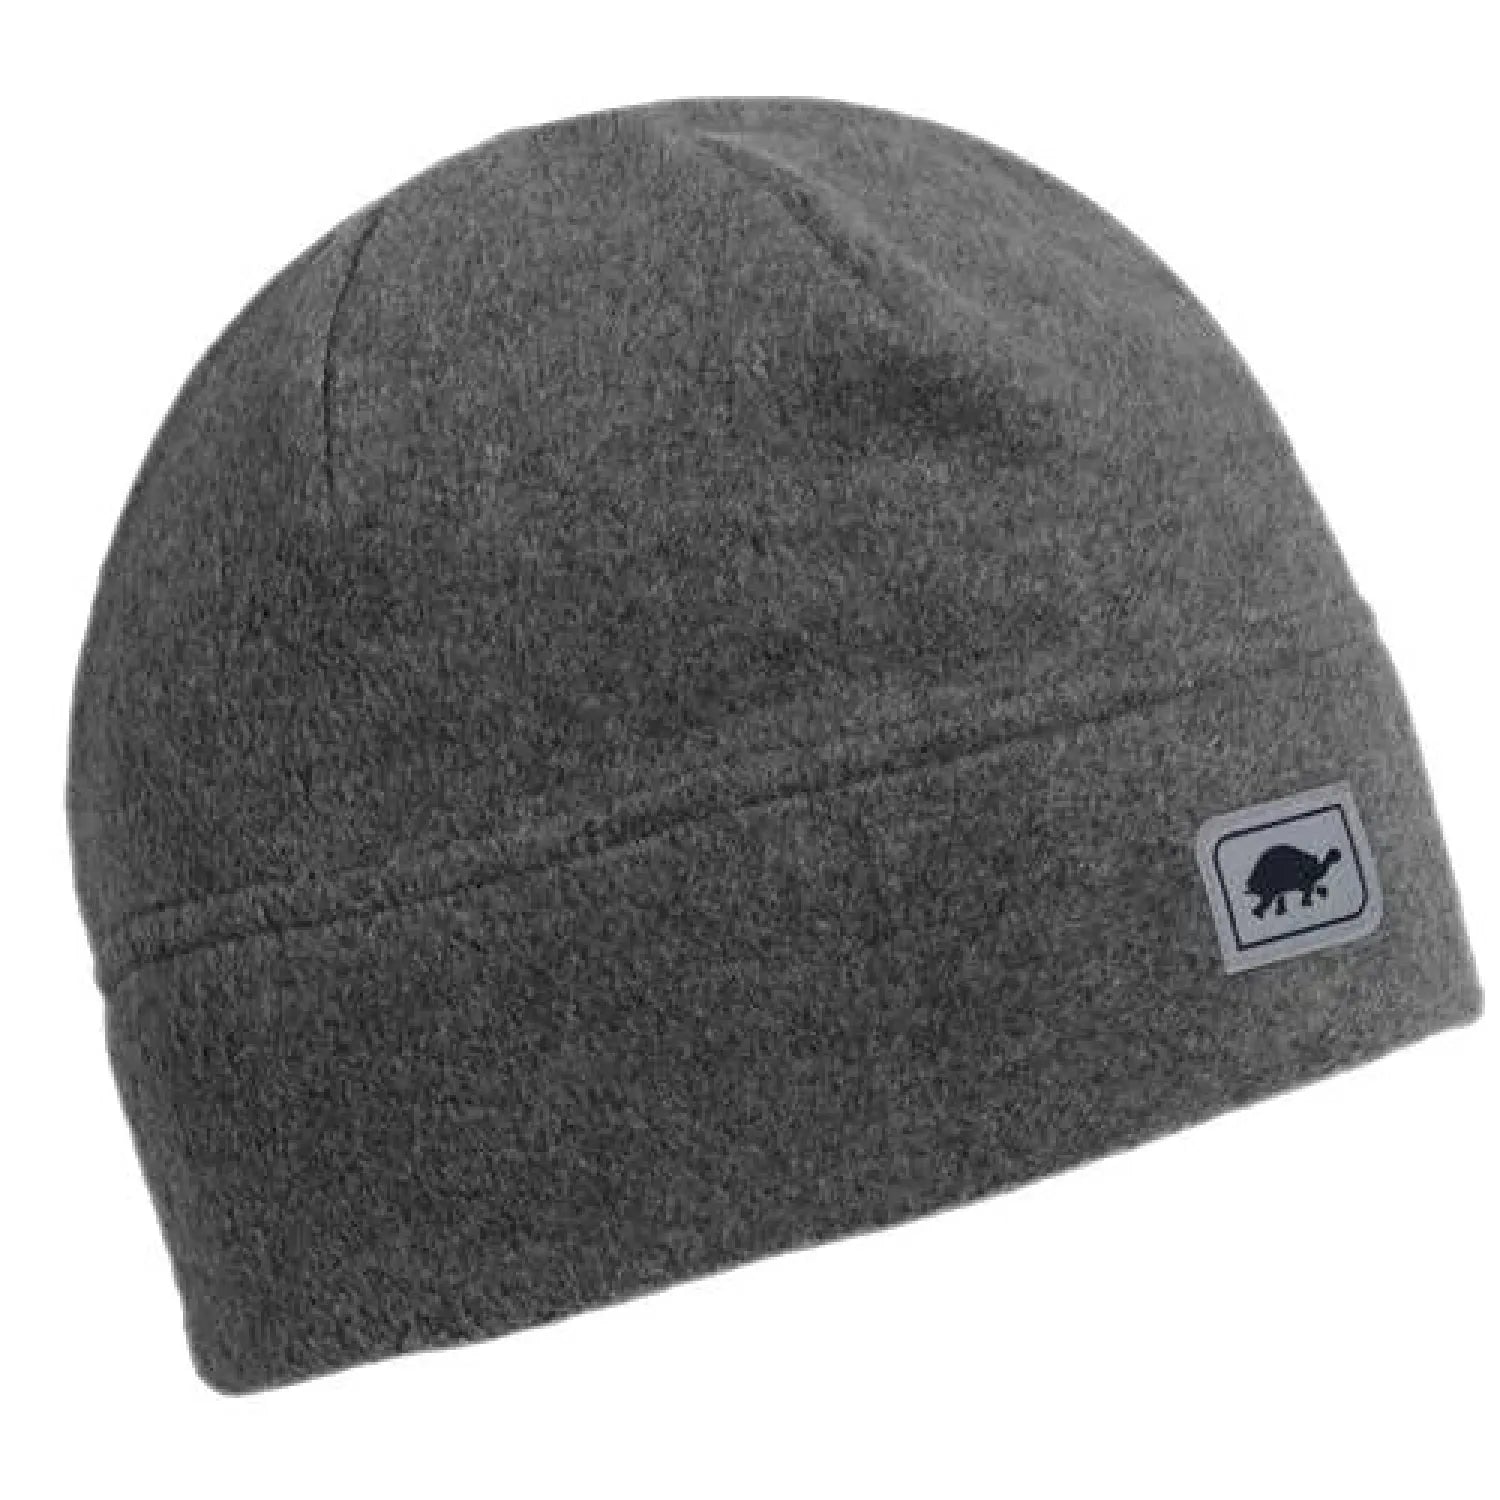 Turtle Fur Recycled Chelonia 150 Fleece Beanie, Charcoal, side view 